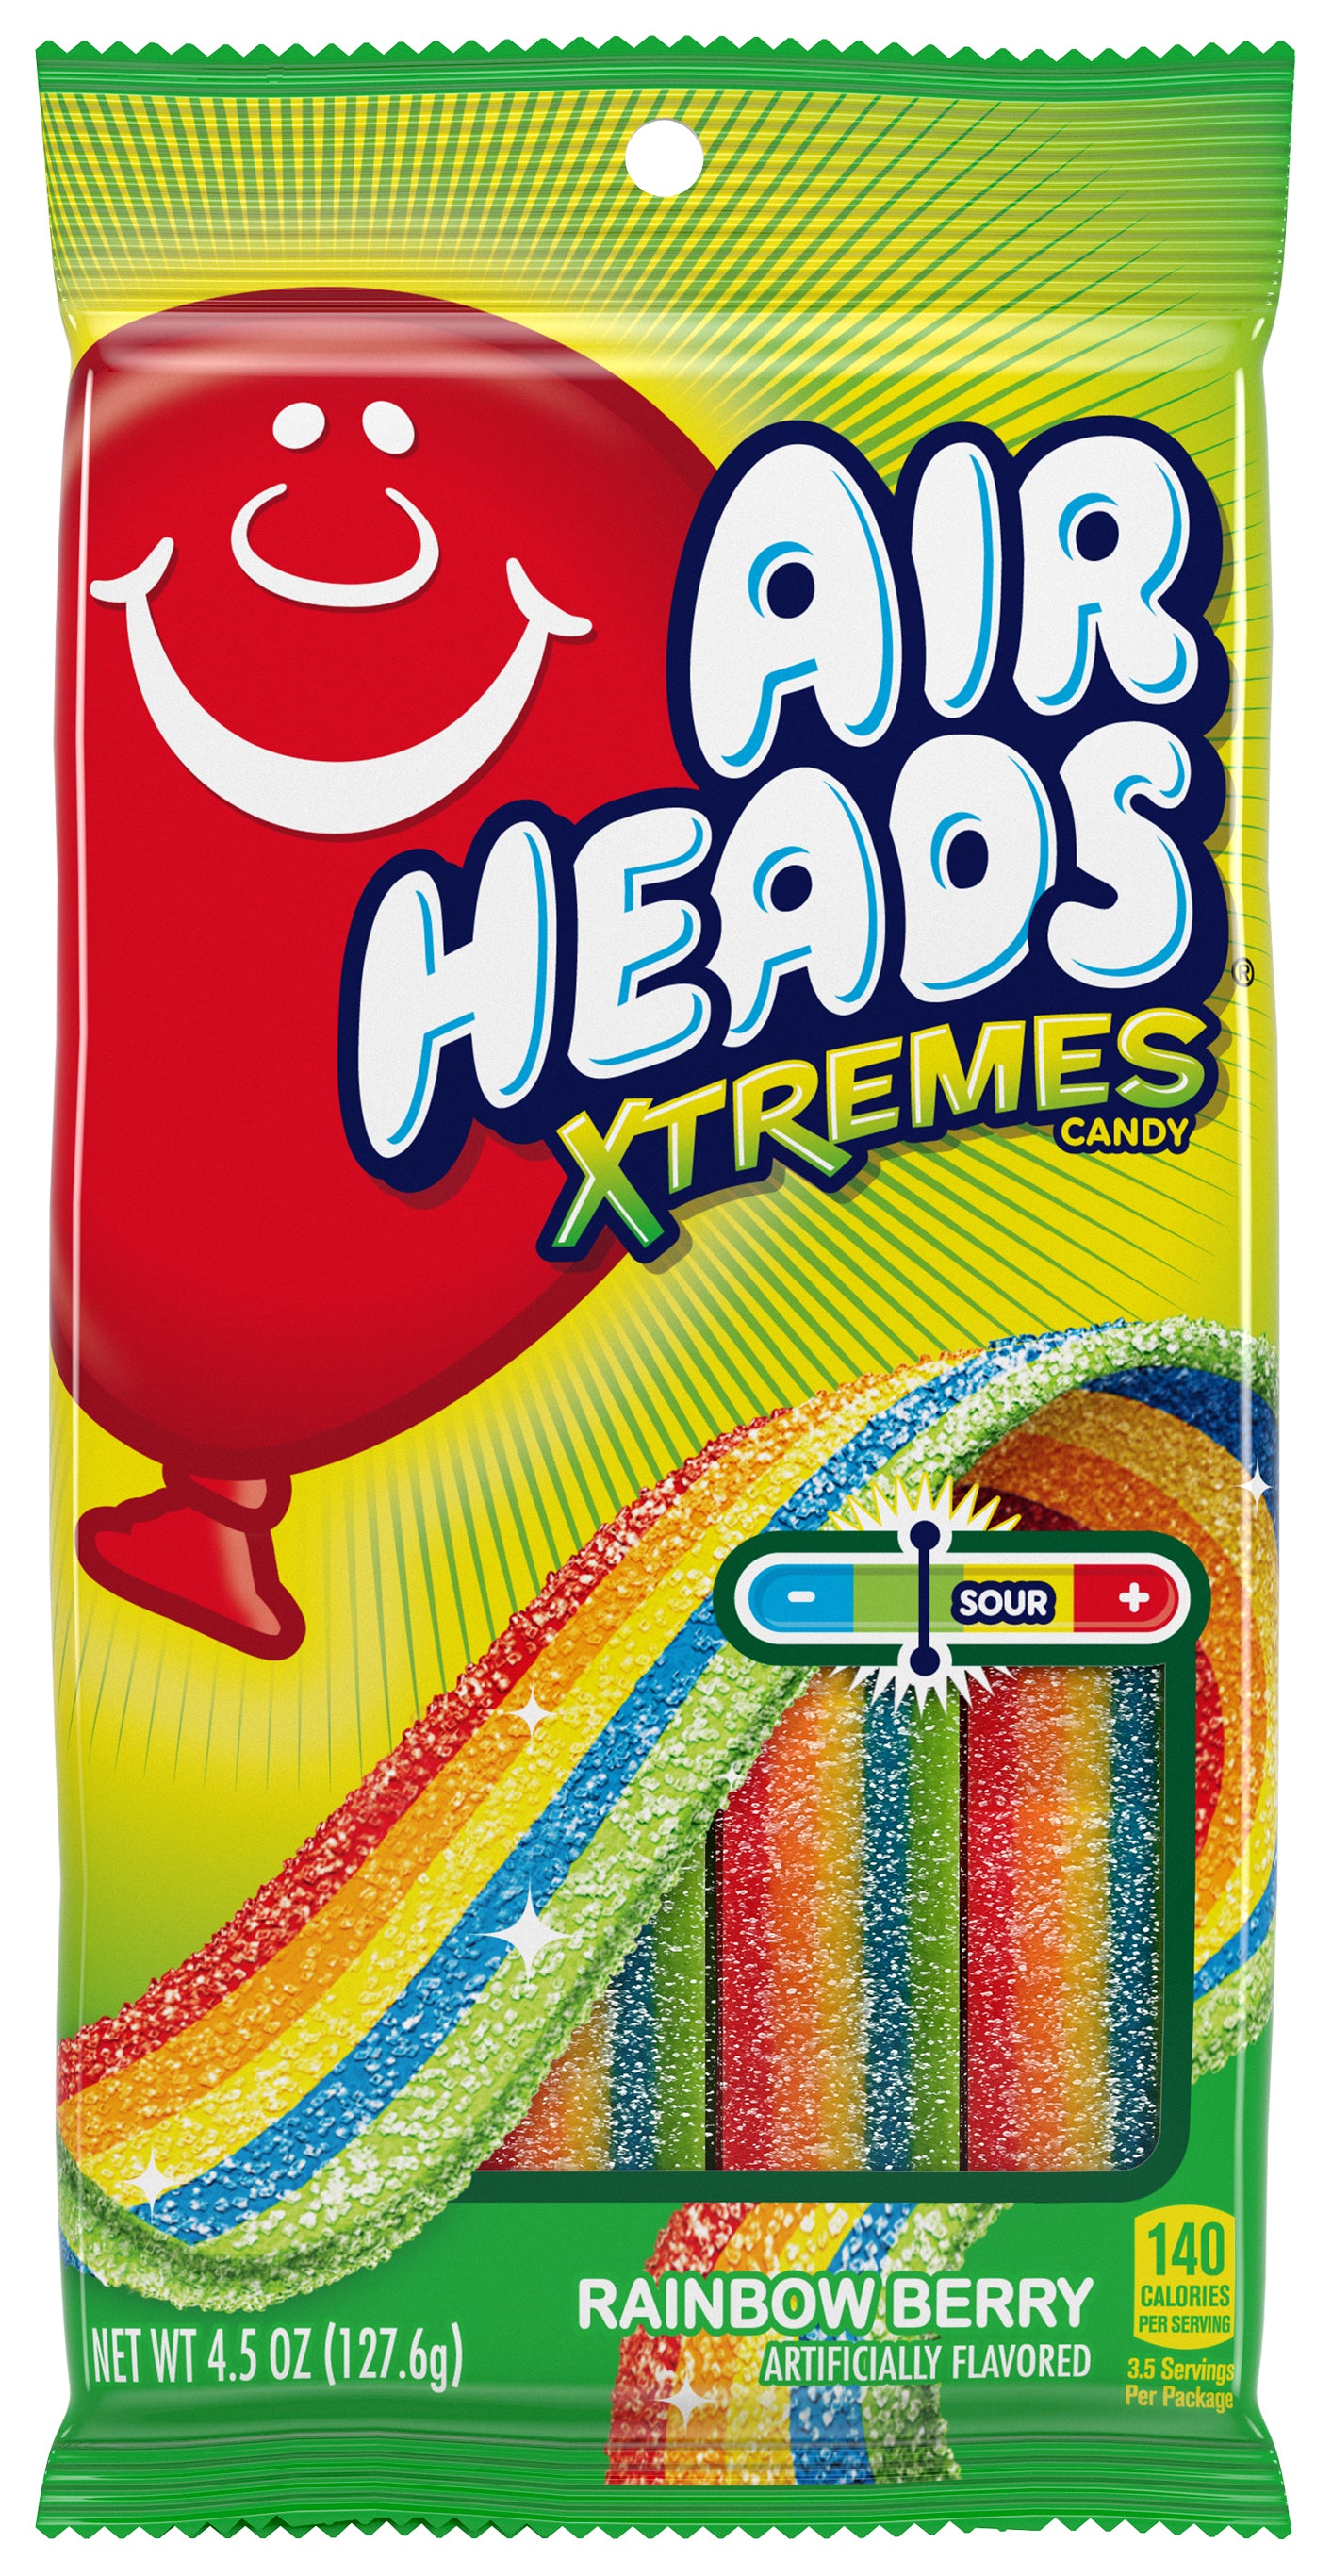 Airheads - Xtremes